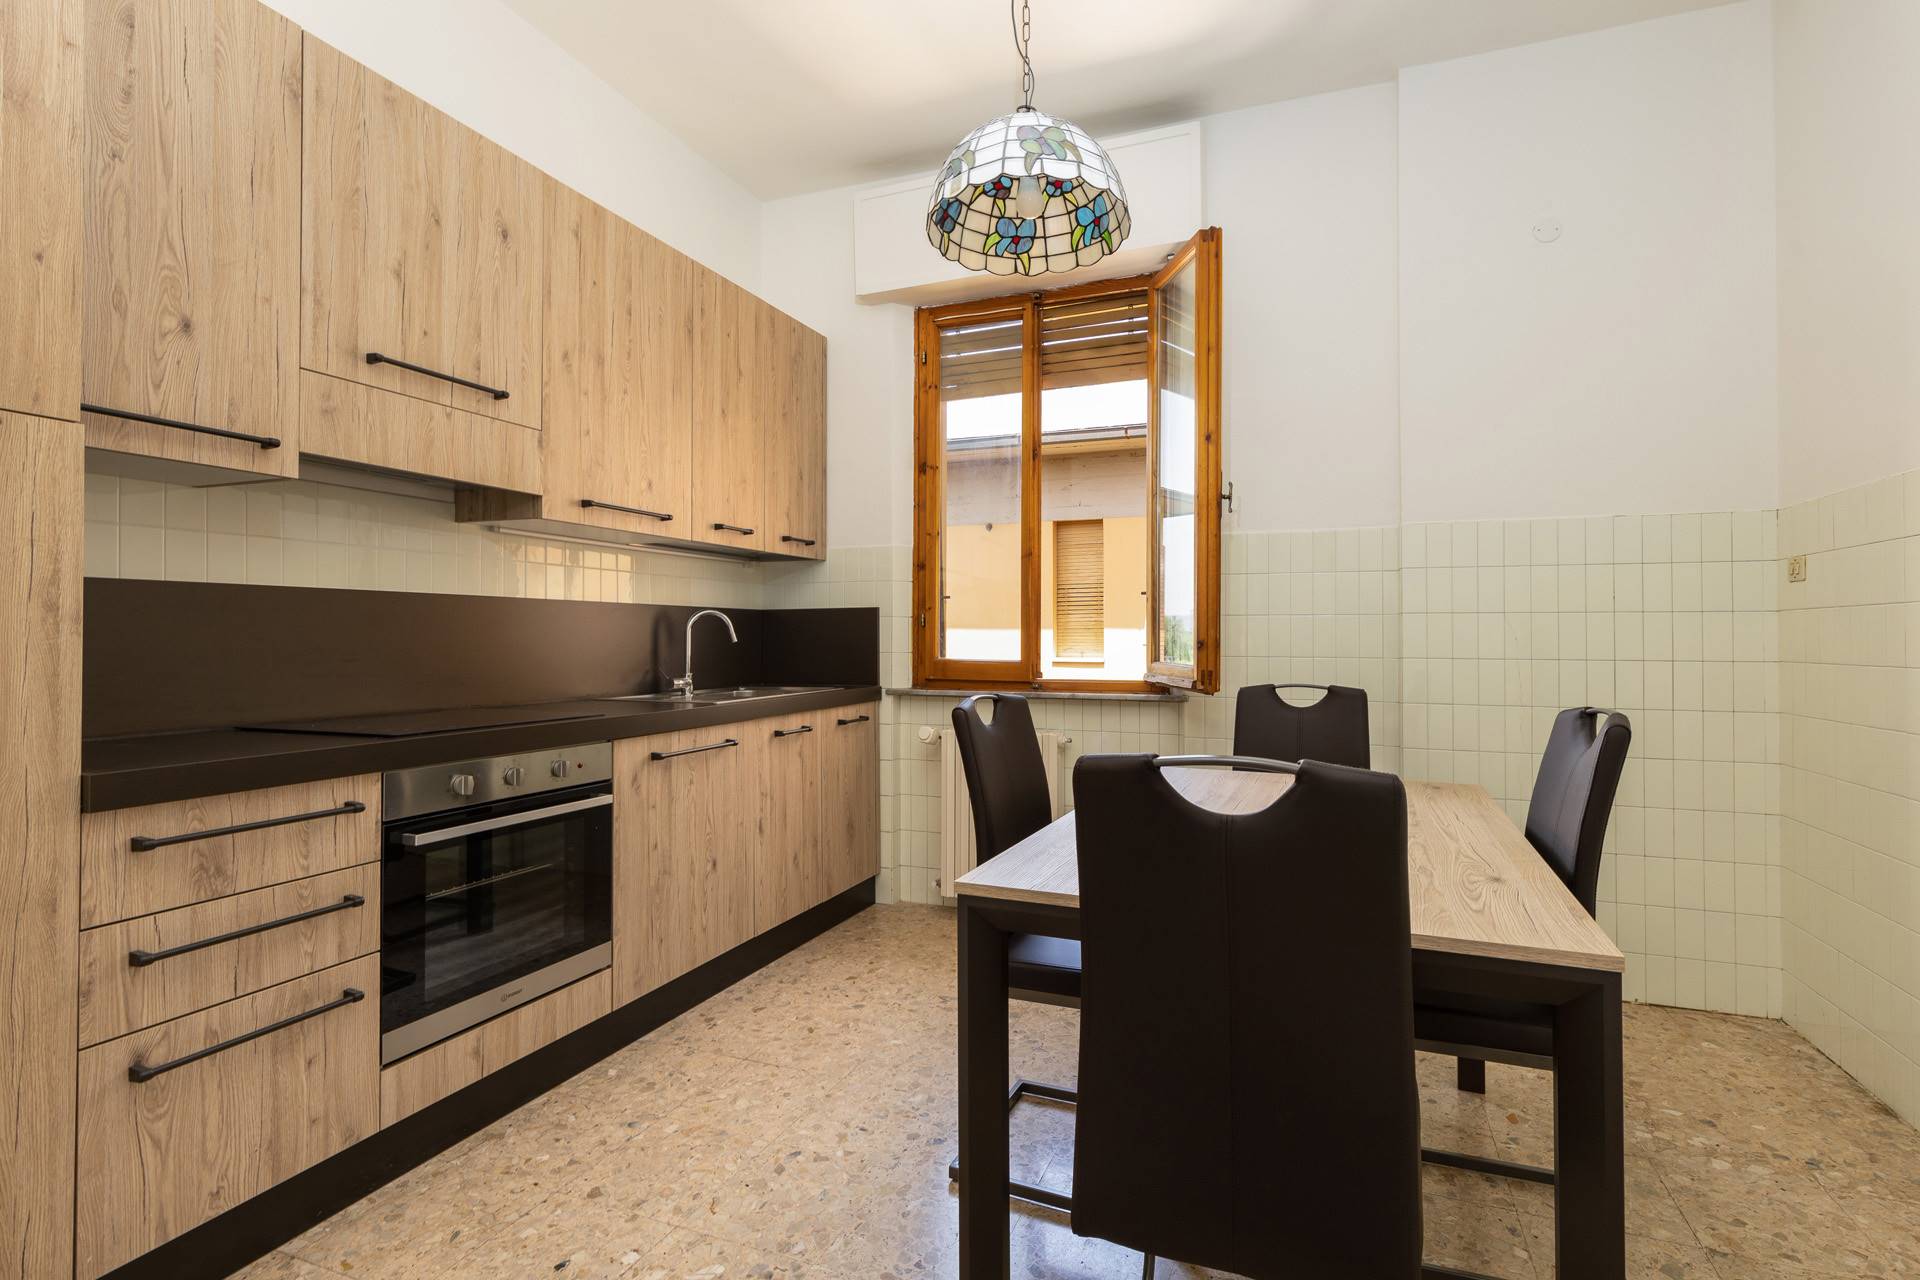 PETRICCIO, SIENA, Apartment for sale of 125 Sq. mt., Be restored, Heating Centralized, Energetic class: G, Epi: 175 kwh/m2 year, placed at 5° on 5, composed by: 5 Rooms, Separate kitchen, , 3 